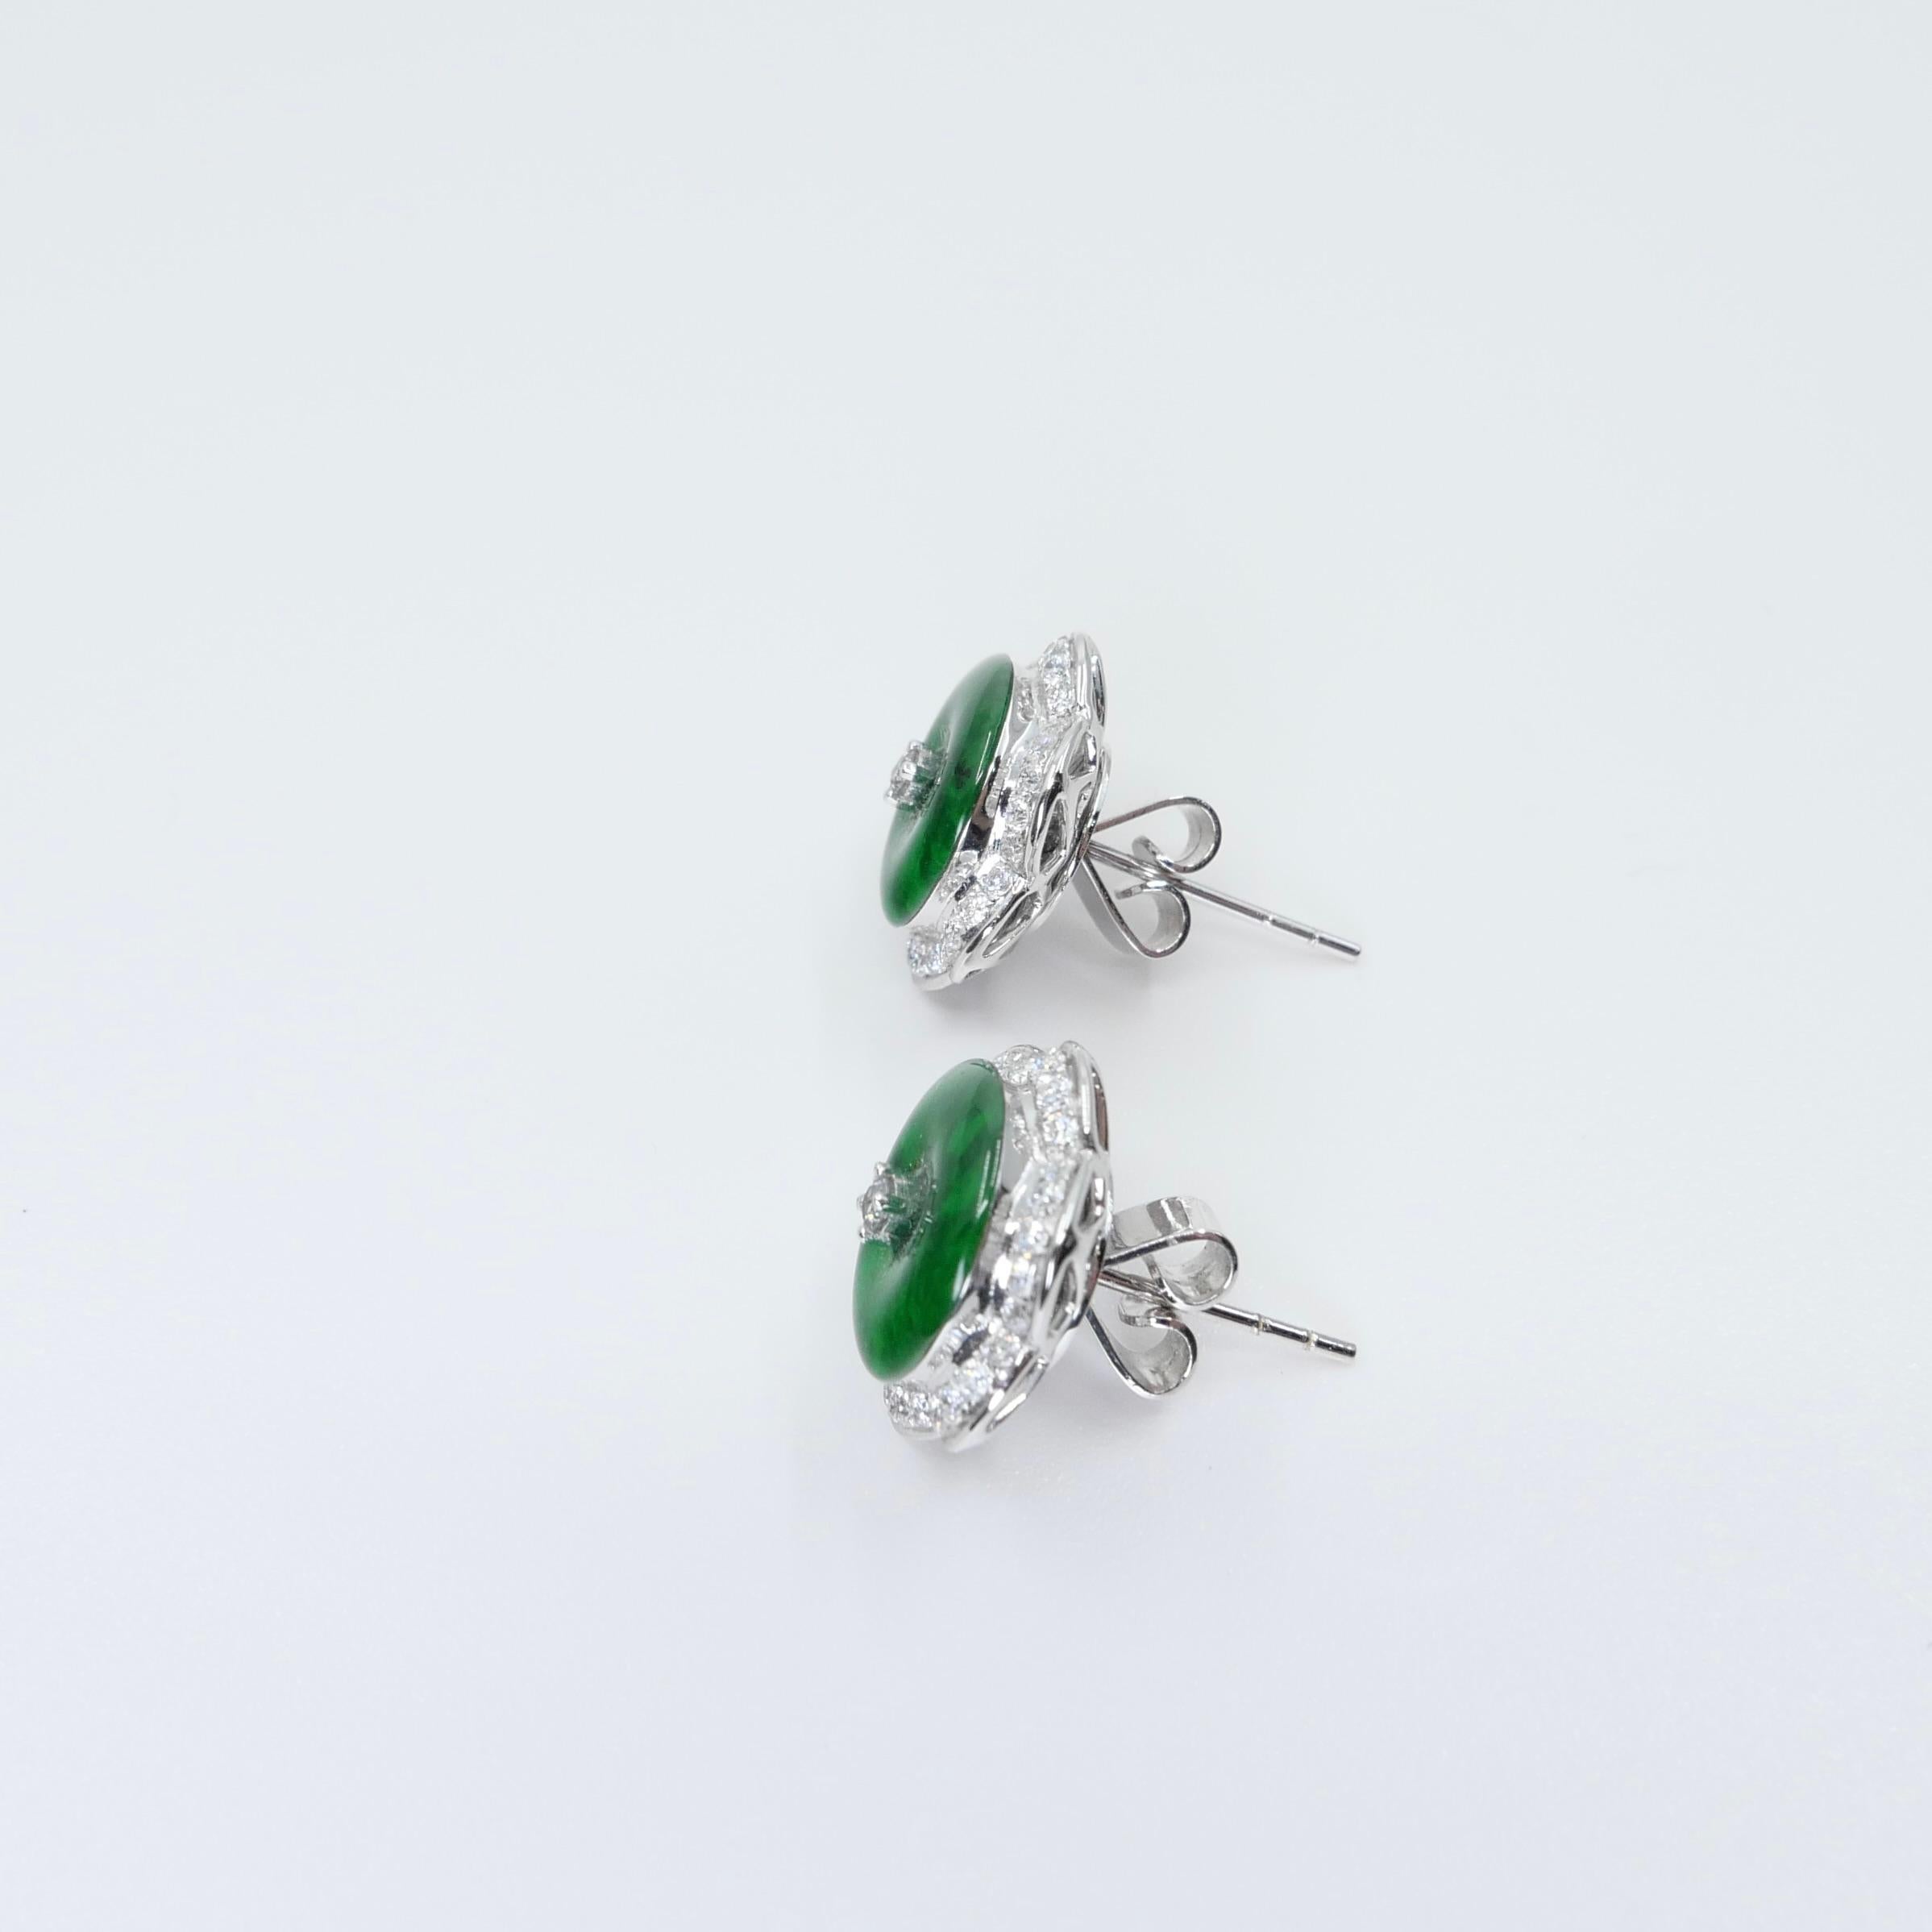 Certified Natural Type A Jadeite Jade And Diamond Earrings. Apple Green Color 8